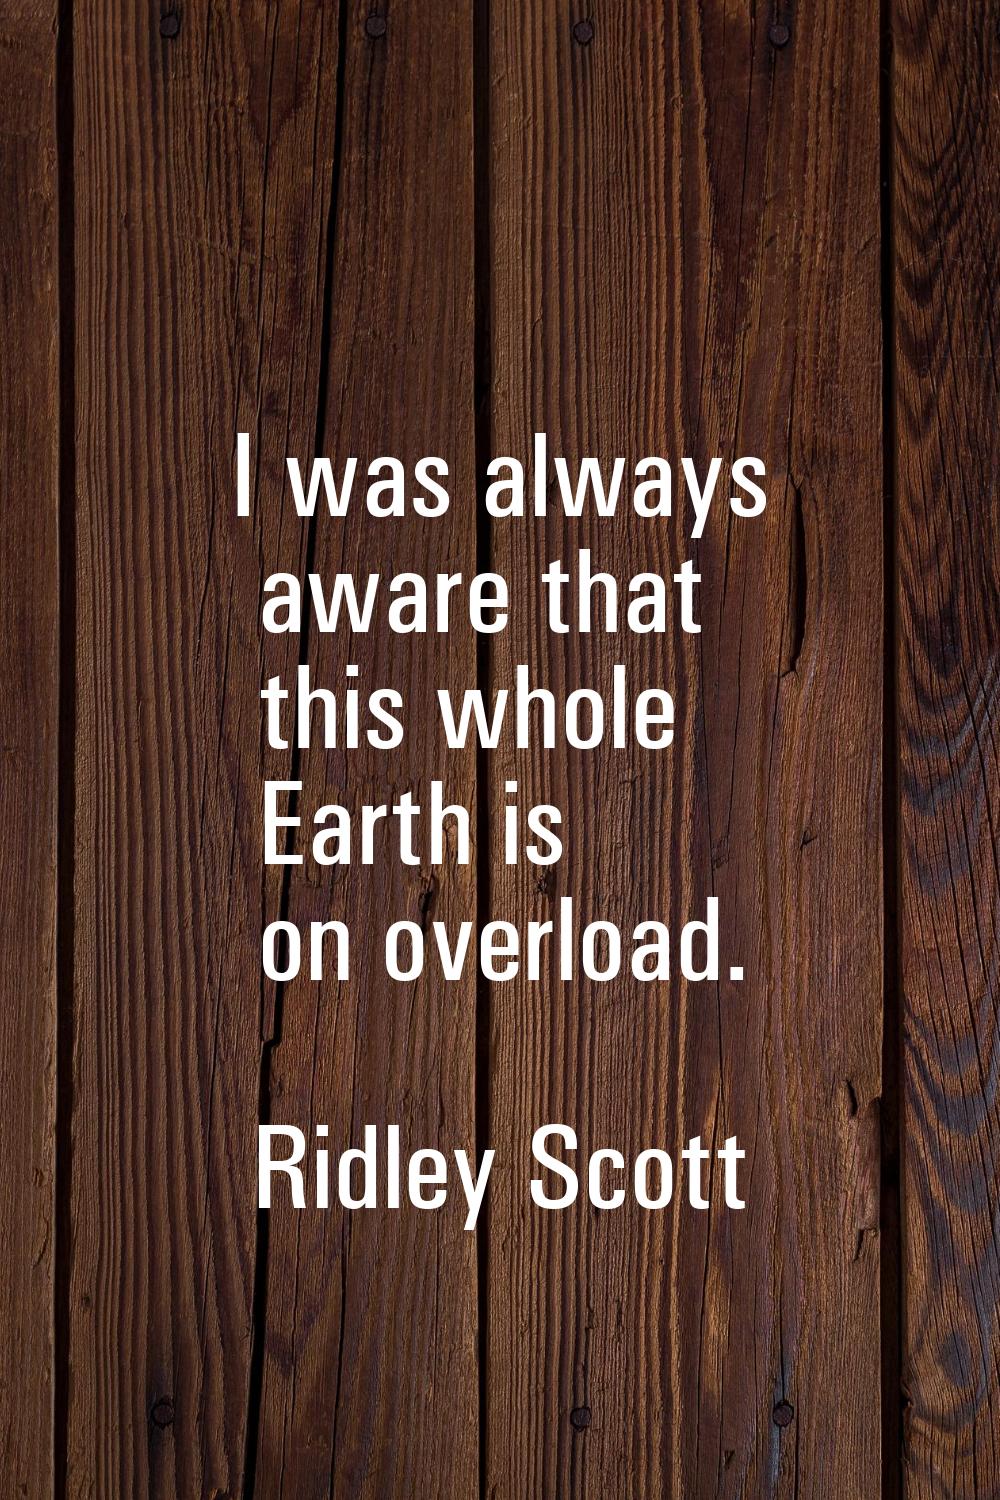 I was always aware that this whole Earth is on overload.